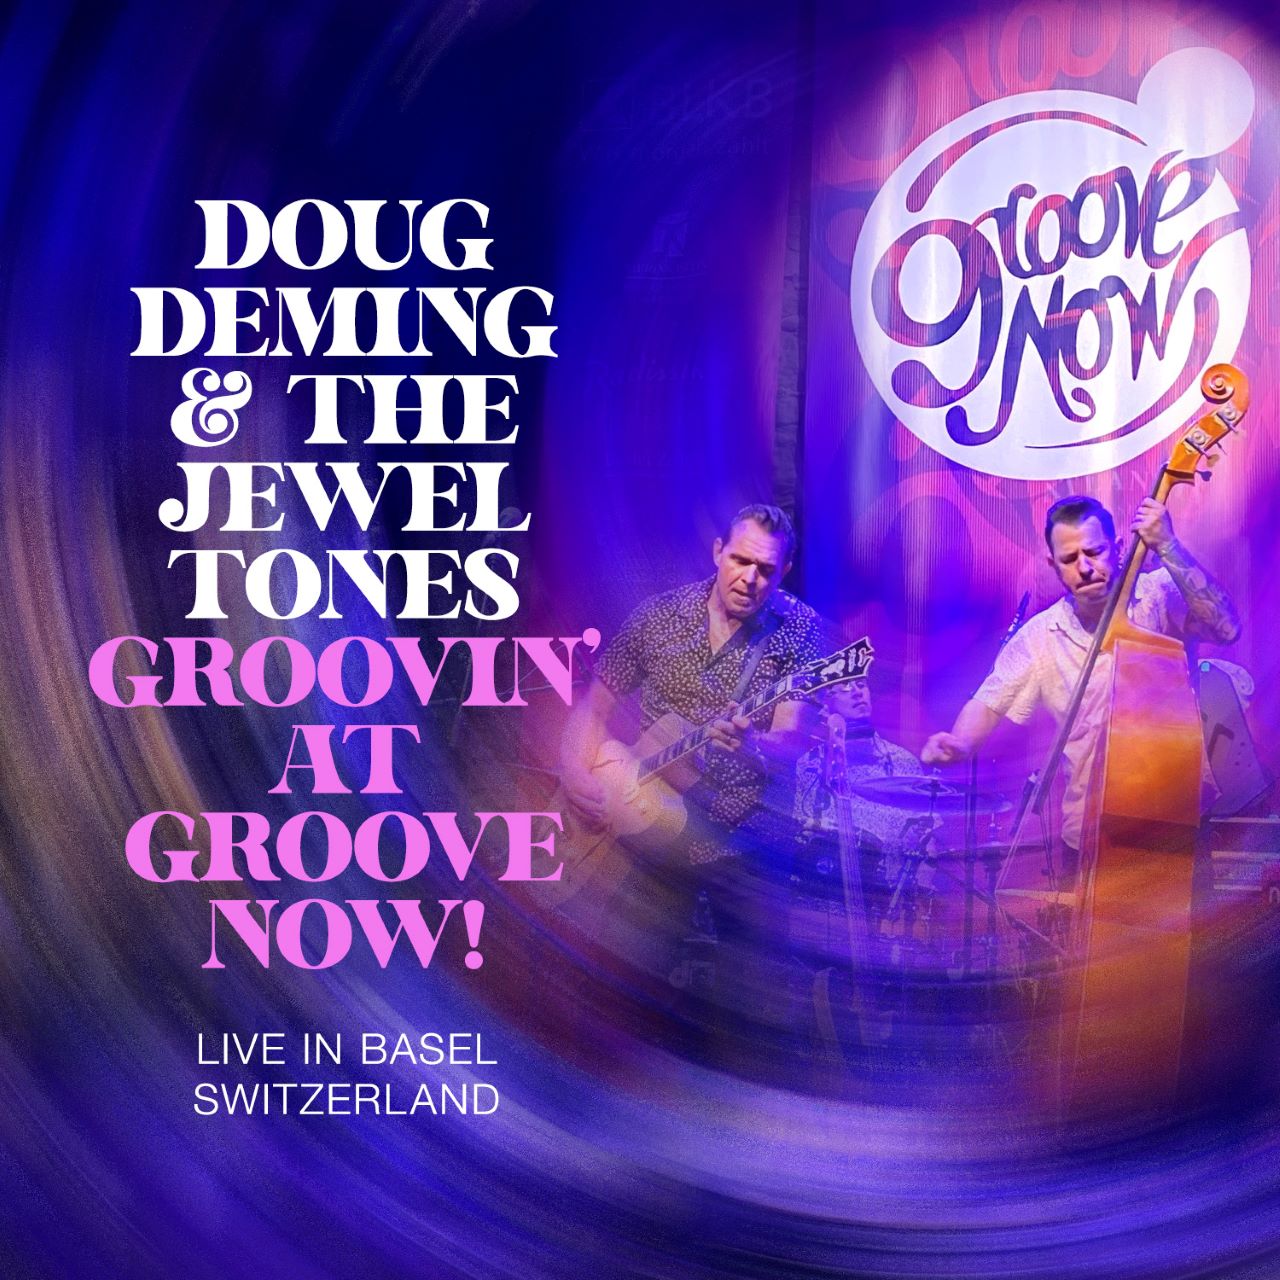 Doug Deming & The Jewel Tones - Groovin' At Groove Now cover album